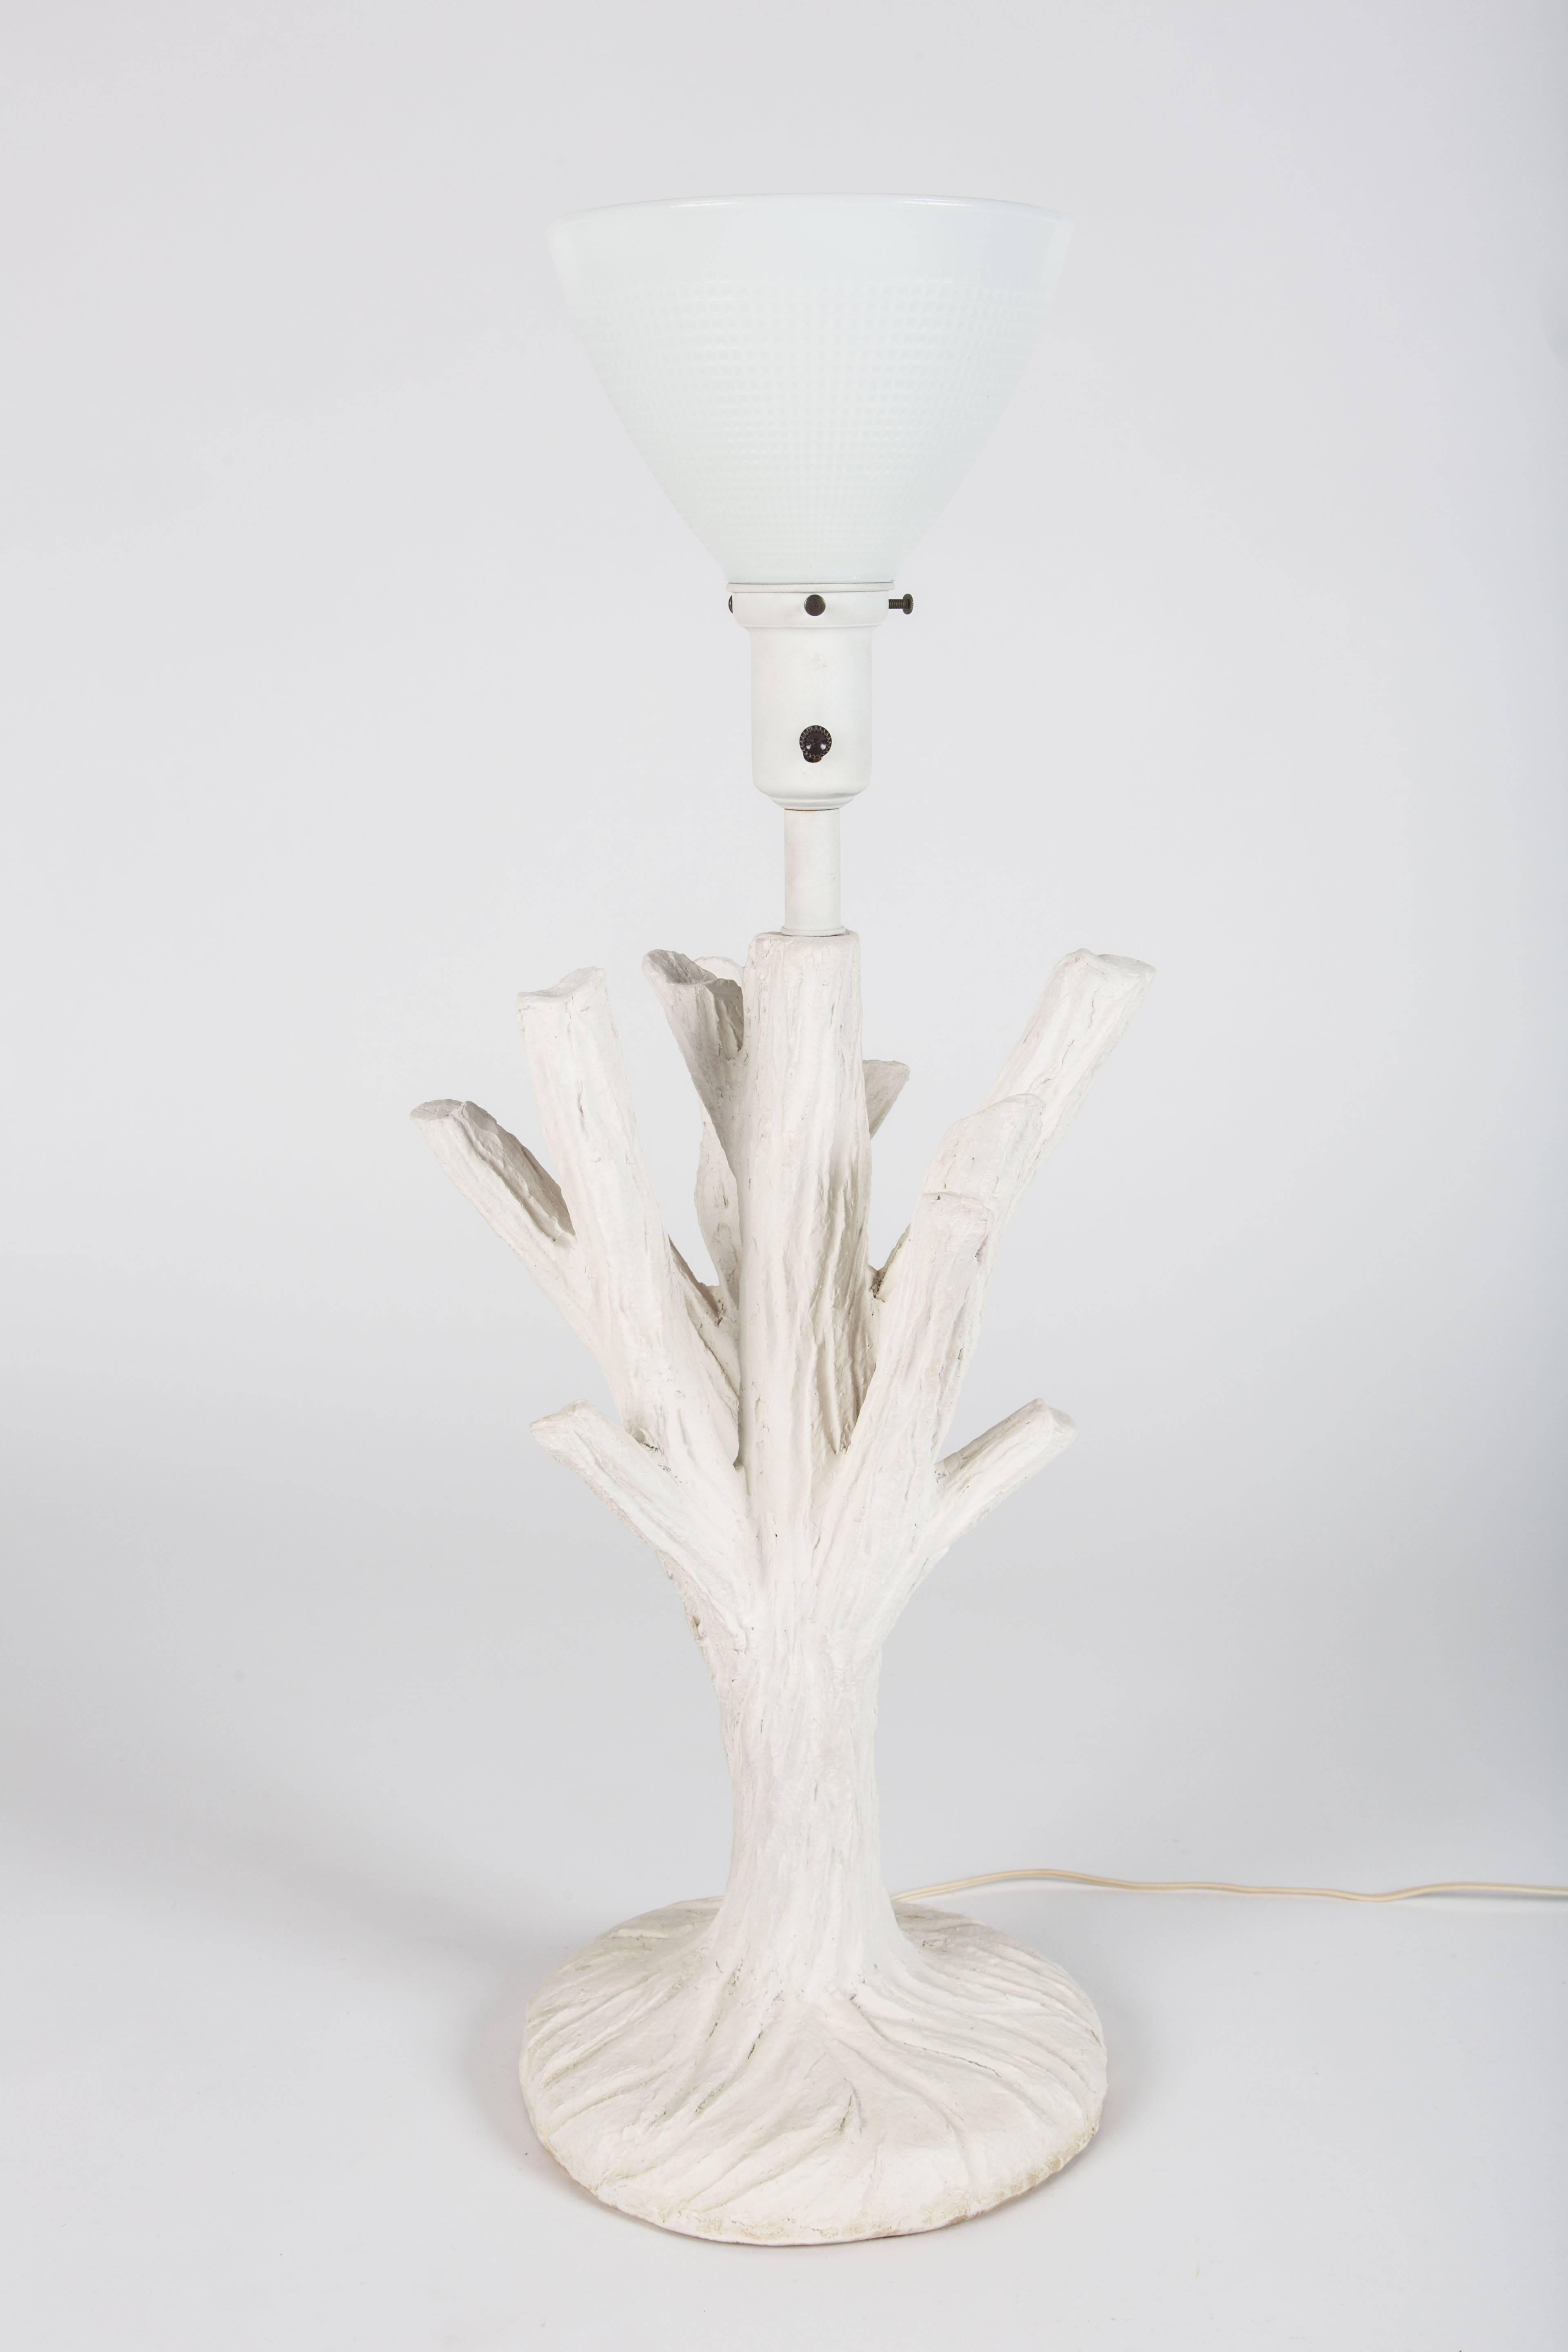 Cast Twig Form Table Lamp by John Dickinson